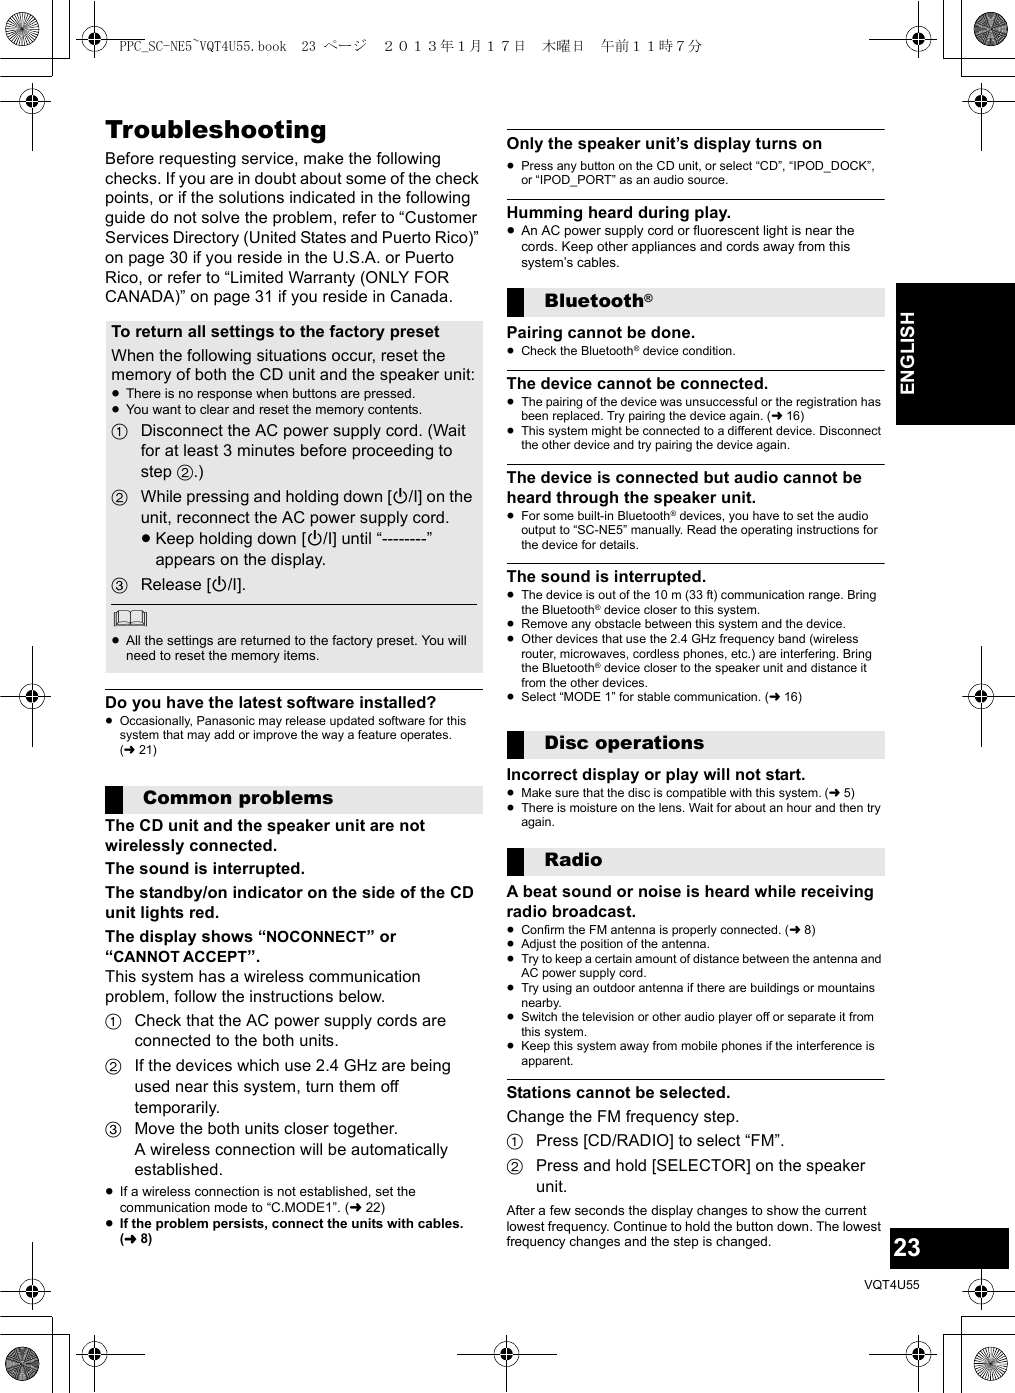 23VQT4U55ENGLISHTroubleshootingBefore requesting service, make the following checks. If you are in doubt about some of the check points, or if the solutions indicated in the following guide do not solve the problem, refer to “Customer Services Directory (United States and Puerto Rico)” on page 30 if you reside in the U.S.A. or Puerto Rico, or refer to “Limited Warranty (ONLY FOR CANADA)” on page 31 if you reside in Canada.Do you have the latest software installed?≥Occasionally, Panasonic may release updated software for this system that may add or improve the way a feature operates. (l21)The CD unit and the speaker unit are not wirelessly connected.The sound is interrupted.The standby/on indicator on the side of the CD unit lights red.The display shows “NOCONNECT” or “CANNOT ACCEPT”.This system has a wireless communication problem, follow the instructions below.1Check that the AC power supply cords are connected to the both units.2If the devices which use 2.4 GHz are being used near this system, turn them off temporarily.3Move the both units closer together.A wireless connection will be automatically established.≥If a wireless connection is not established, set the communication mode to “C.MODE1”. (l22)≥If the problem persists, connect the units with cables. (l8)Only the speaker unit’s display turns on≥Press any button on the CD unit, or select “CD”, “IPOD_DOCK”, or “IPOD_PORT” as an audio source.Humming heard during play.≥An AC power supply cord or fluorescent light is near the cords. Keep other appliances and cords away from this system’s cables.Pairing cannot be done.≥Check the Bluetooth® device condition.The device cannot be connected.≥The pairing of the device was unsuccessful or the registration has been replaced. Try pairing the device again. (l16)≥This system might be connected to a different device. Disconnect the other device and try pairing the device again. The device is connected but audio cannot be heard through the speaker unit.≥For some built-in Bluetooth® devices, you have to set the audio output to “SC-NE5” manually. Read the operating instructions for the device for details.The sound is interrupted.≥The device is out of the 10 m (33 ft) communication range. Bring the Bluetooth® device closer to this system.≥Remove any obstacle between this system and the device.≥Other devices that use the 2.4 GHz frequency band (wireless router, microwaves, cordless phones, etc.) are interfering. Bring the Bluetooth® device closer to the speaker unit and distance it from the other devices.≥Select “MODE 1” for stable communication. (l16)Incorrect display or play will not start.≥Make sure that the disc is compatible with this system. (l5)≥There is moisture on the lens. Wait for about an hour and then try again.A beat sound or noise is heard while receiving radio broadcast.≥Confirm the FM antenna is properly connected. (l8)≥Adjust the position of the antenna.≥Try to keep a certain amount of distance between the antenna and AC power supply cord.≥Try using an outdoor antenna if there are buildings or mountains nearby.≥Switch the television or other audio player off or separate it from this system.≥Keep this system away from mobile phones if the interference is apparent.Stations cannot be selected.Change the FM frequency step.1Press [CD/RADIO] to select “FM”.2Press and hold [SELECTOR] on the speaker unit.After a few seconds the display changes to show the current lowest frequency. Continue to hold the button down. The lowest frequency changes and the step is changed.To return all settings to the factory presetWhen the following situations occur, reset the memory of both the CD unit and the speaker unit:≥There is no response when buttons are pressed.≥You want to clear and reset the memory contents.1Disconnect the AC power supply cord. (Wait for at least 3 minutes before proceeding to step 2.)2While pressing and holding down [Í/I] on the unit, reconnect the AC power supply cord.≥Keep holding down [Í/I] until “--------” appears on the display.3Release [Í/I].≥All the settings are returned to the factory preset. You will need to reset the memory items.Common problemsBluetooth®Disc operationsRadioPPC_SC-NE5~VQT4U55.book  23 ページ  ２０１３年１月１７日　木曜日　午前１１時７分